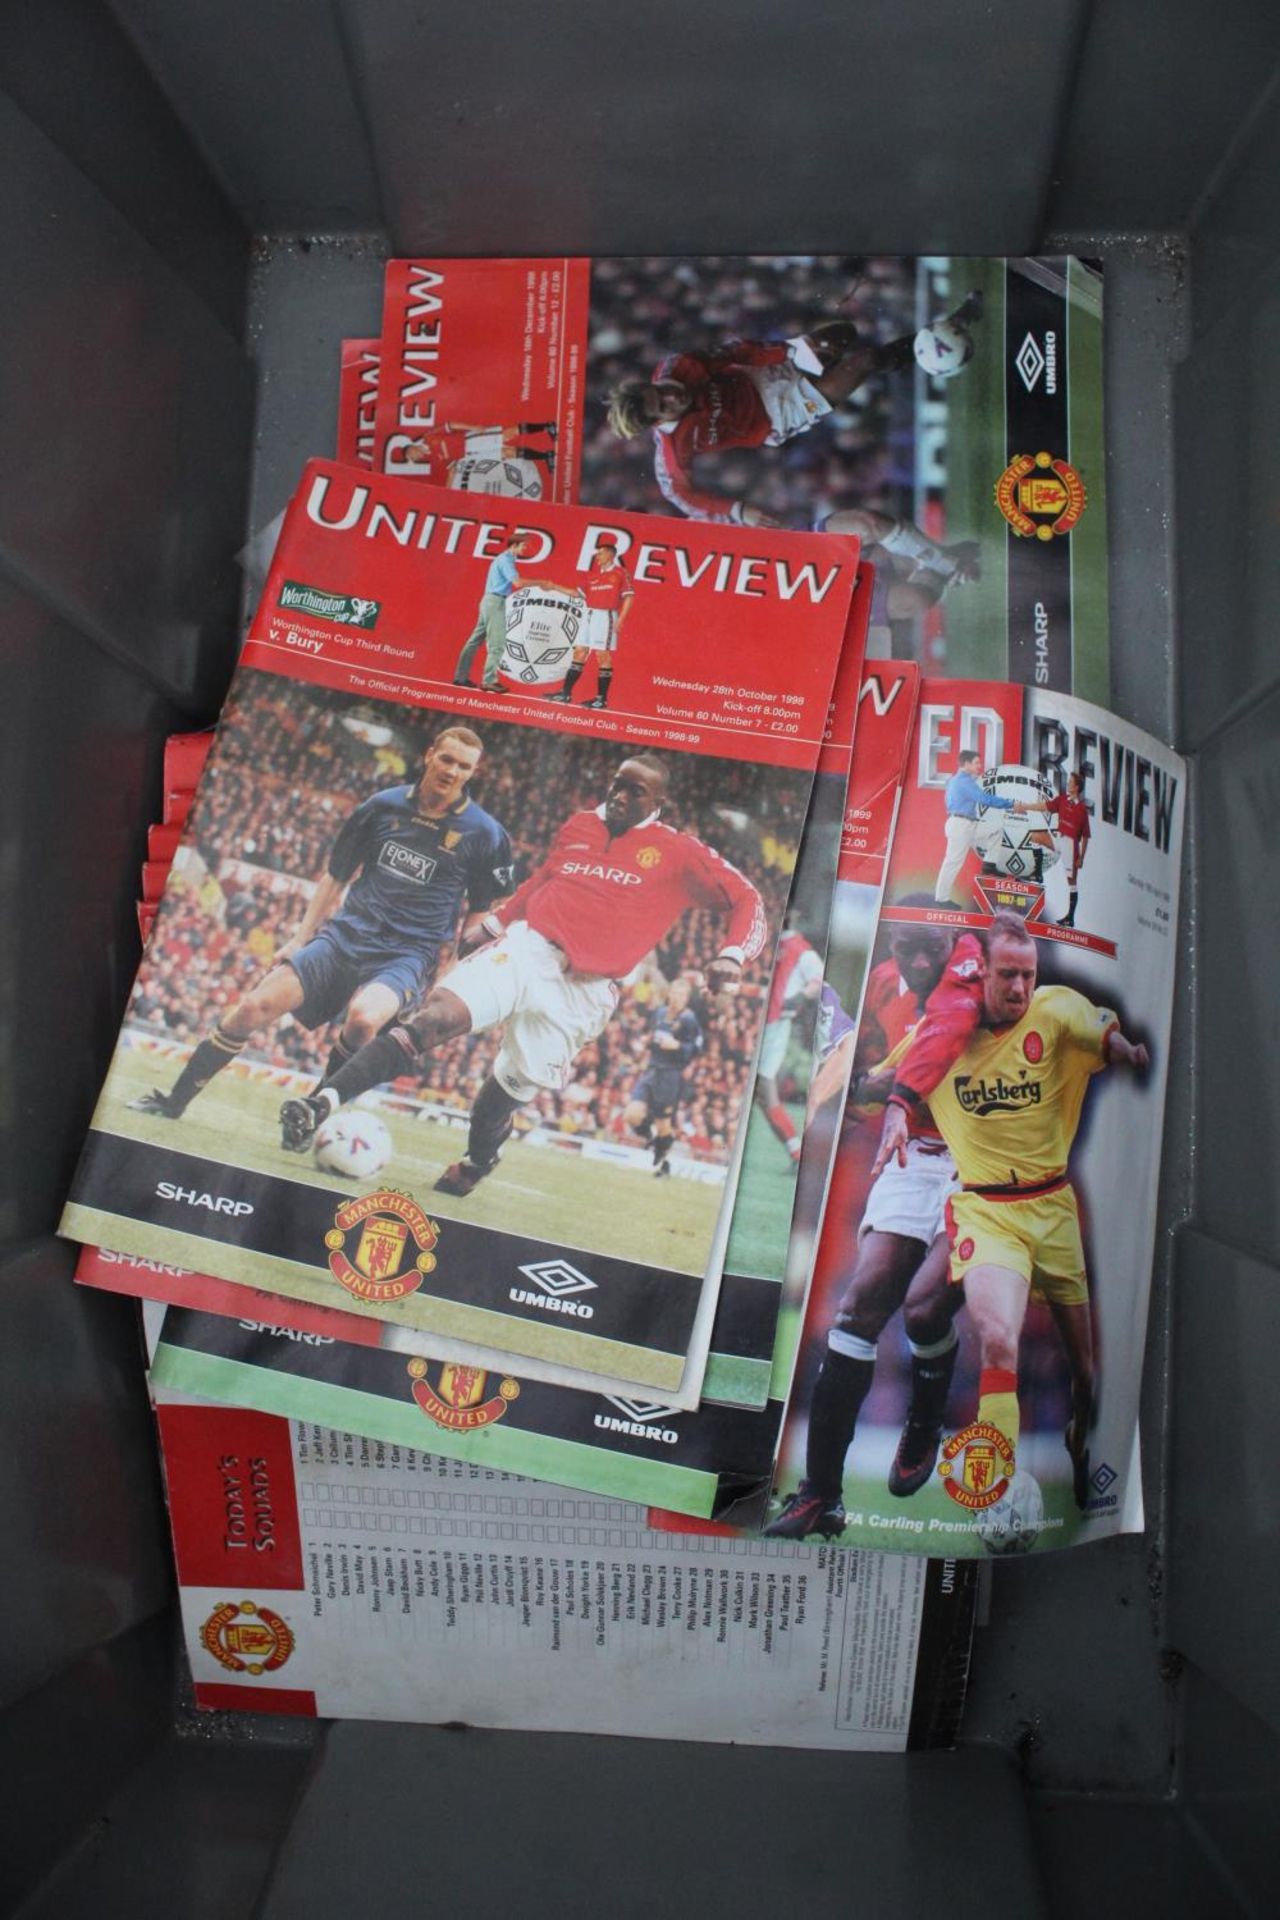 TWO BOXES CONTAINING ENGLAND FLAGS & MANCHESTER UNITED FOOTBALL PROGRAMS NO VAT - Image 3 of 4